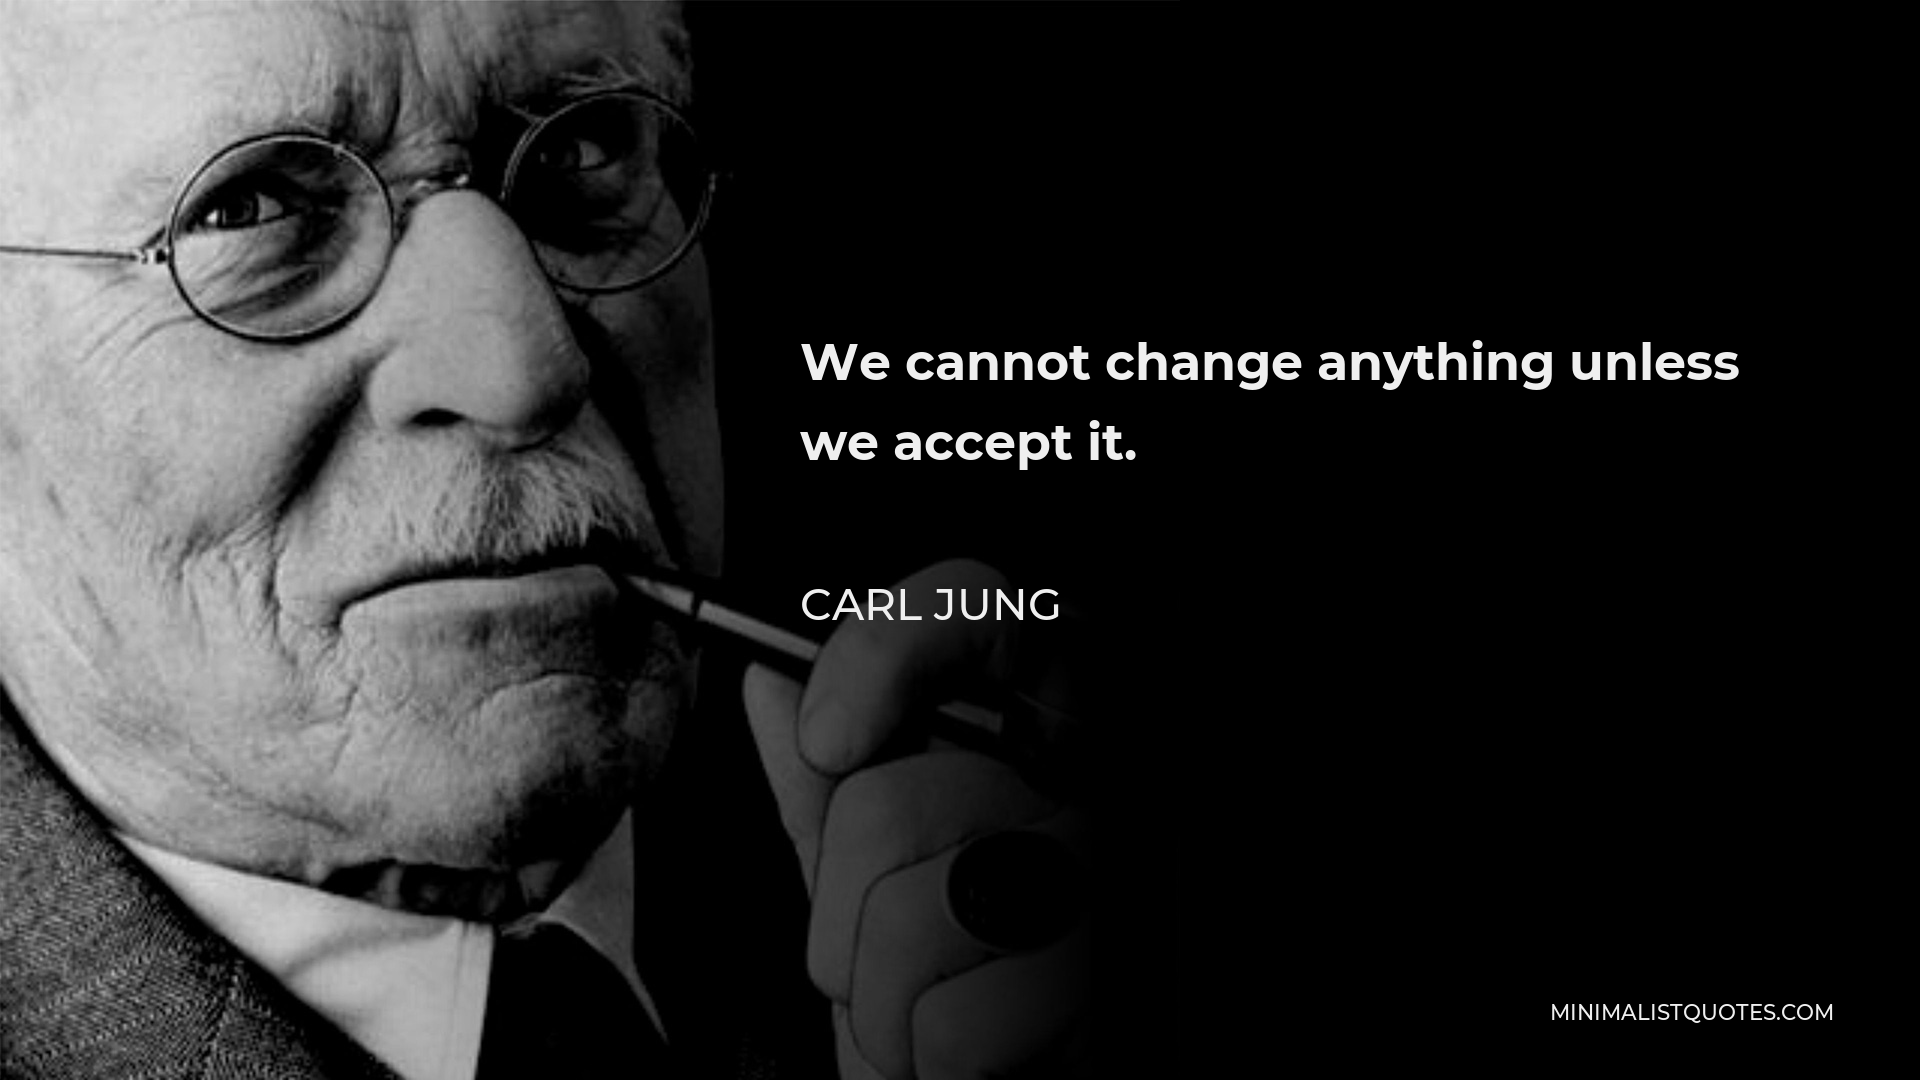 Carl Jung Quote - We cannot change anything unless we accept it.